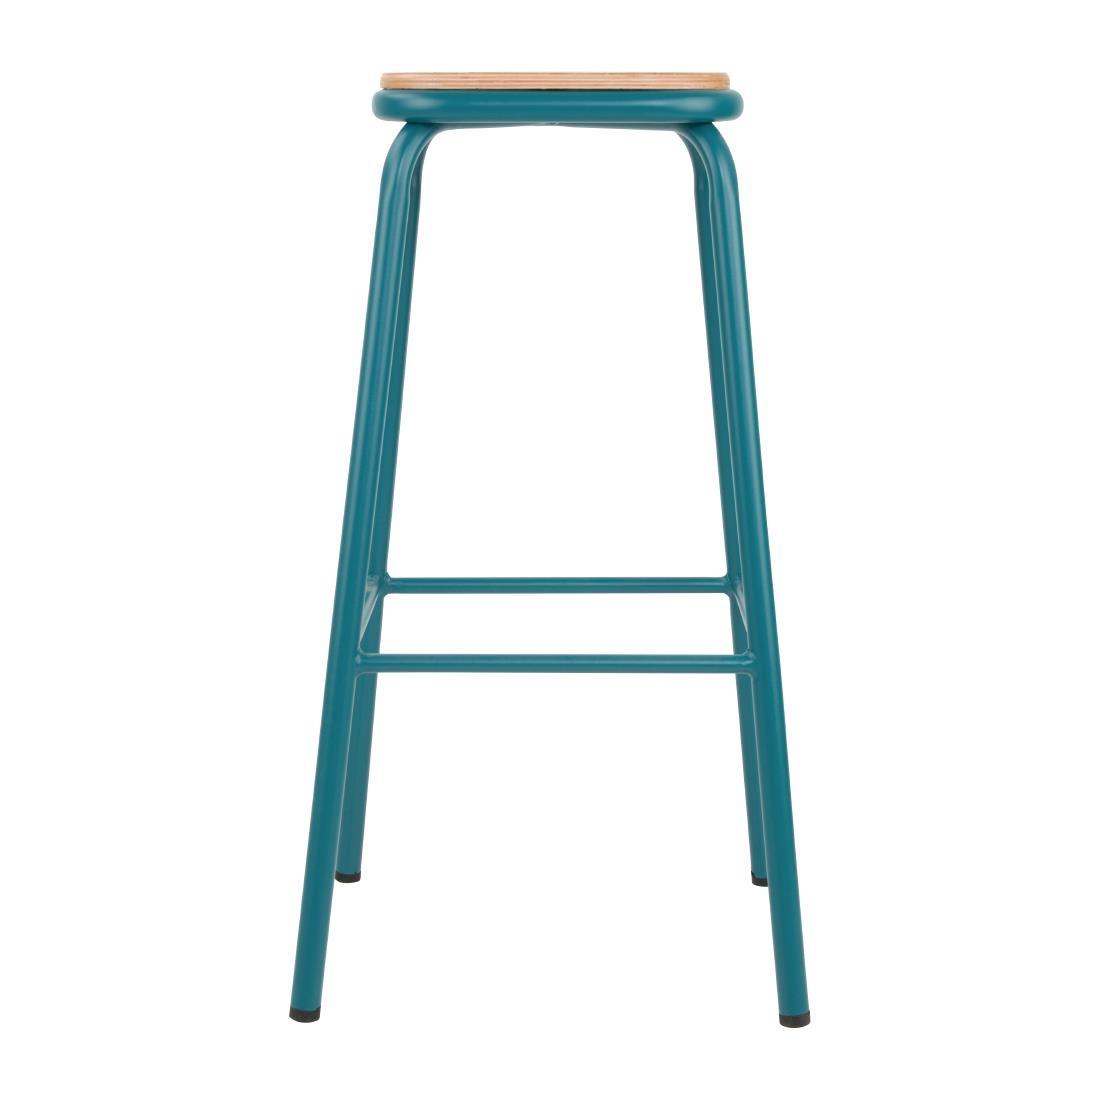 Bolero Cantina High Stools with Wooden Seat Pad Teal (Pack of 4) - FB938  - 2